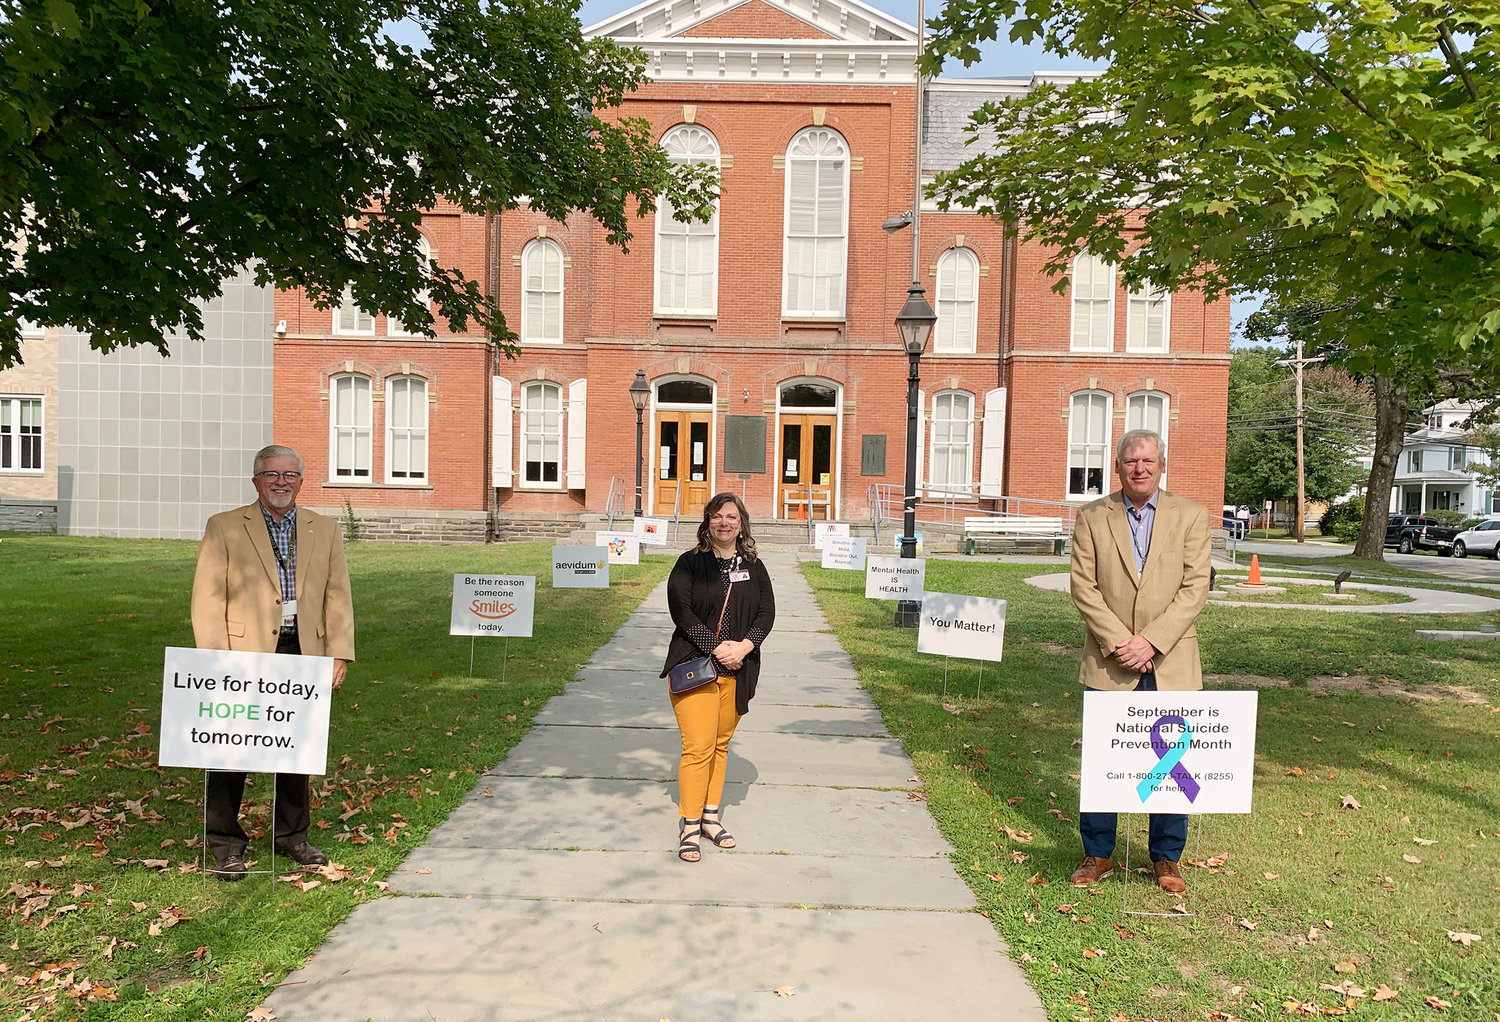 Pictured installing Suicide Prevention Month signs on the lawn of the Pike County Courthouse are Pike County Commissioner Chairman Matthew Osterberg, left; System of Care Coordinator for Carbon, Monroe and Pike counties Larissa Kimmel; and Pike County Commissioner Vice Chairman Ronald Schmalzle.